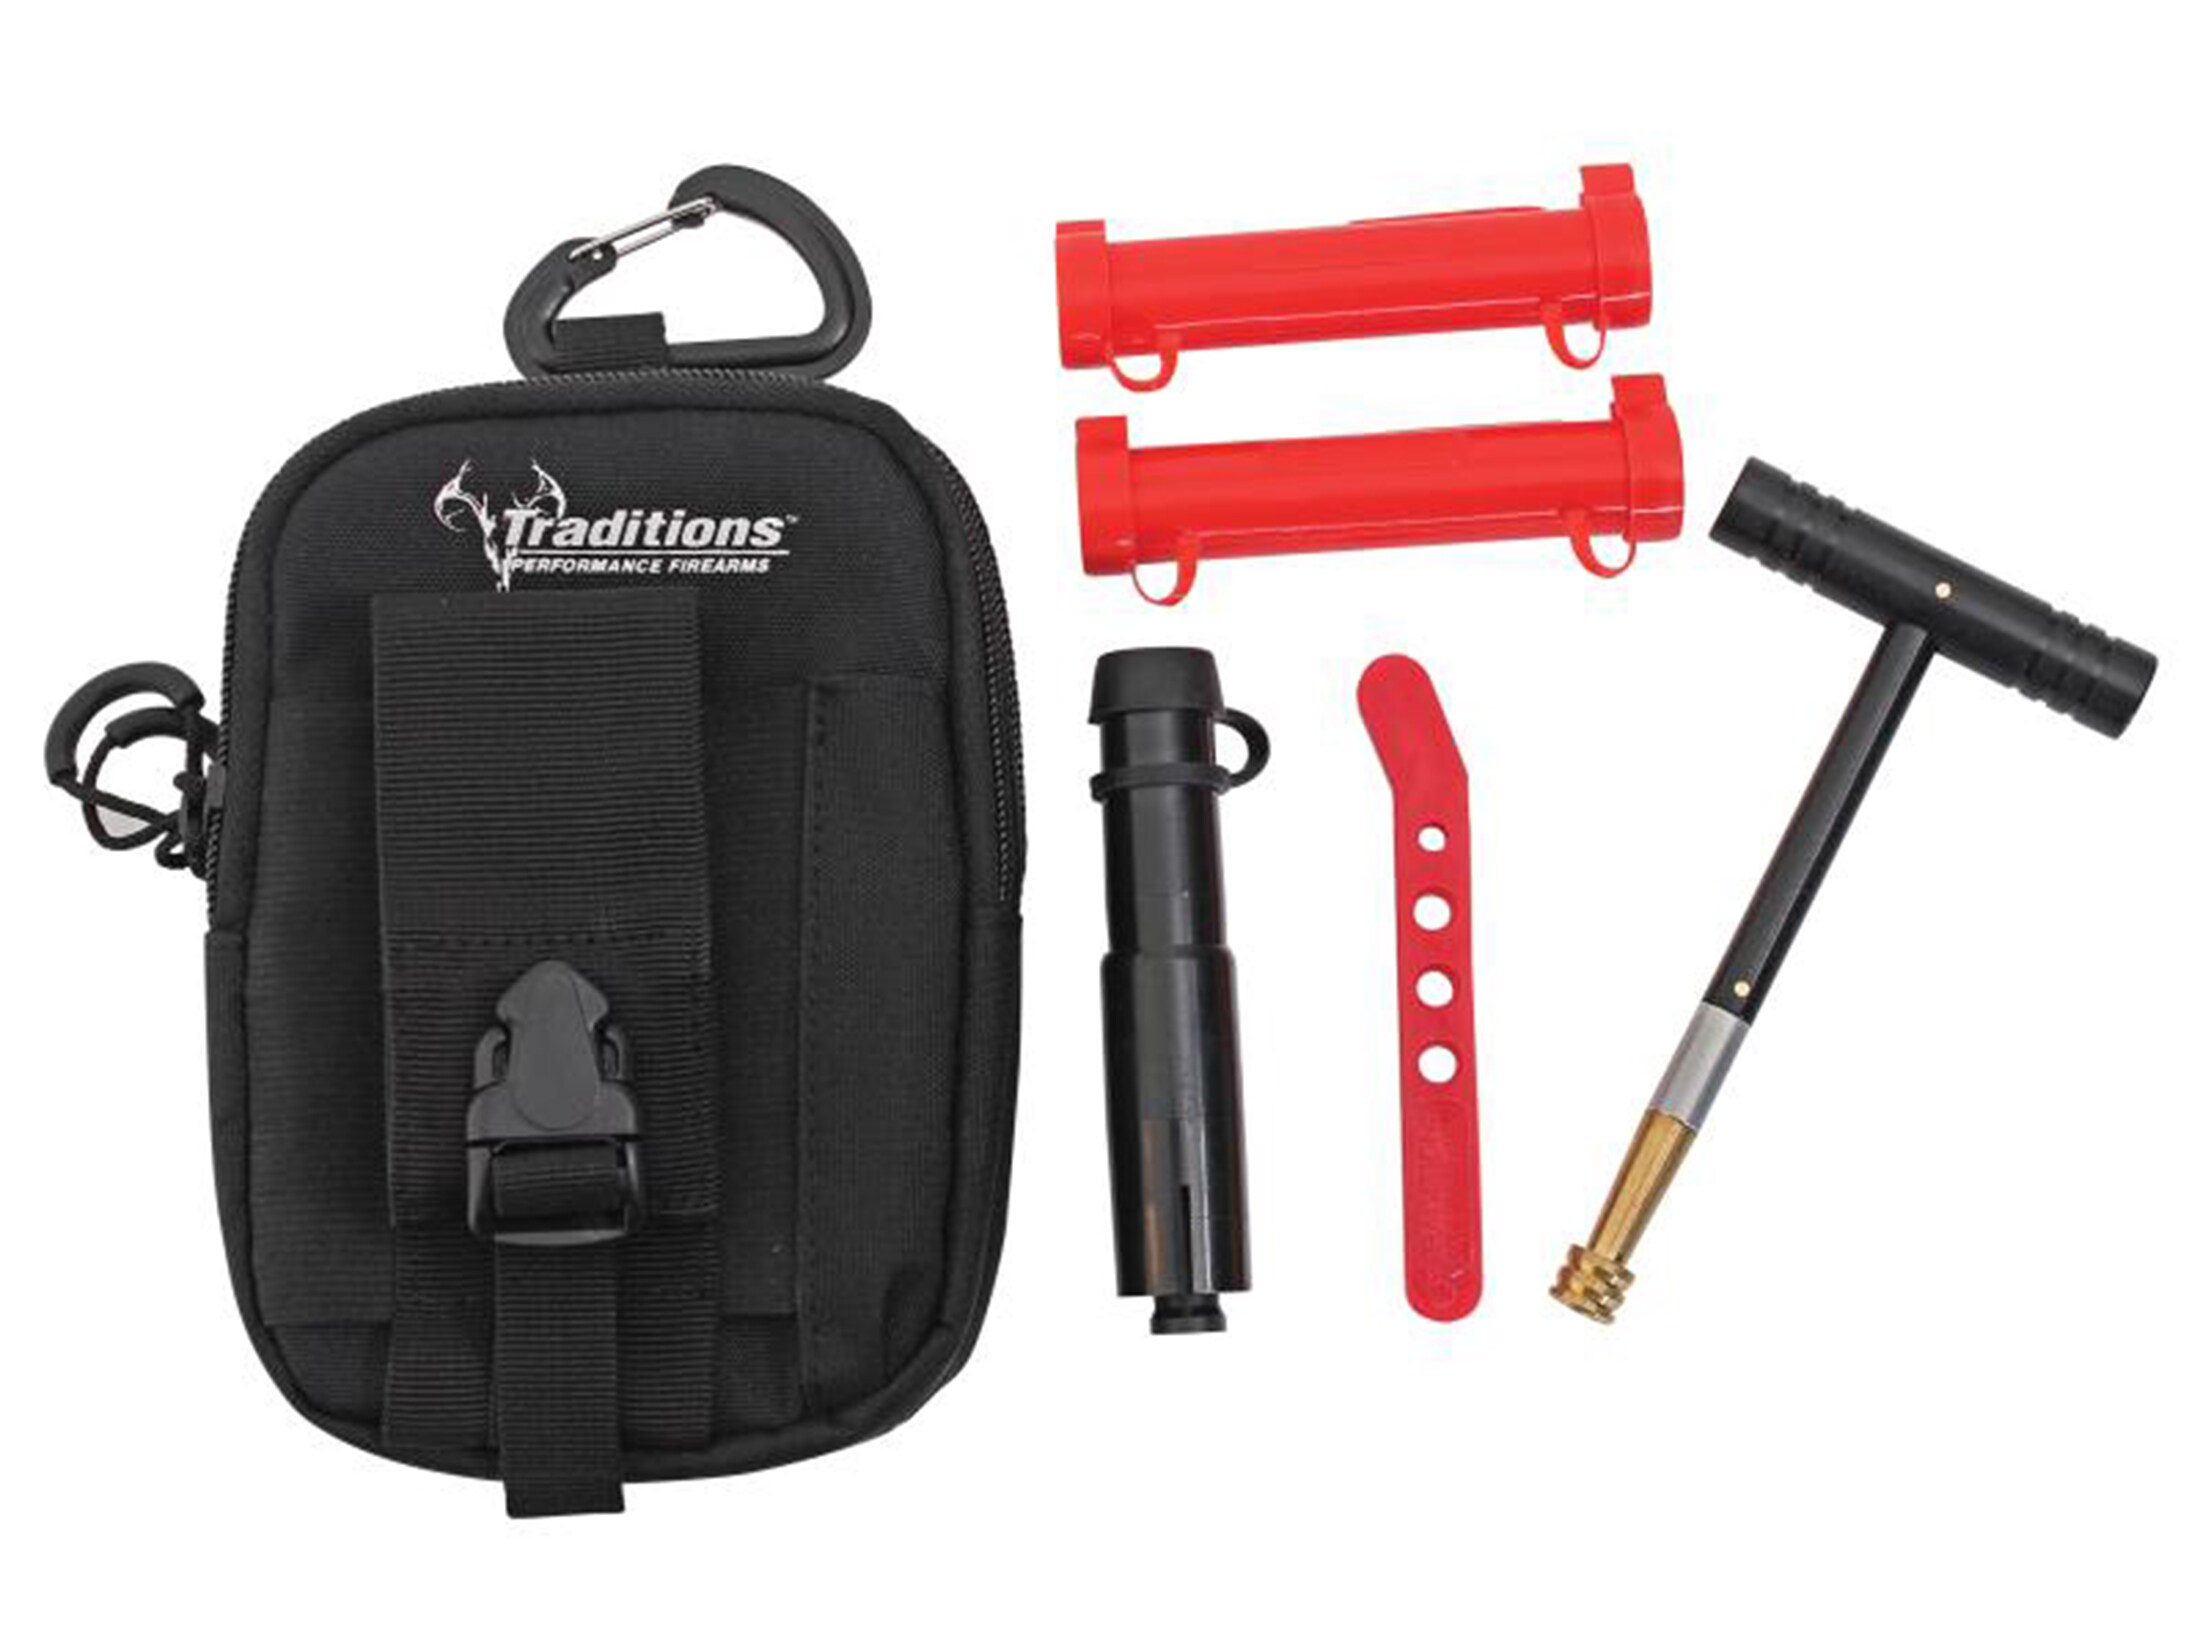 Image of Traditions Field Shooter's Kit with Belt Pouch